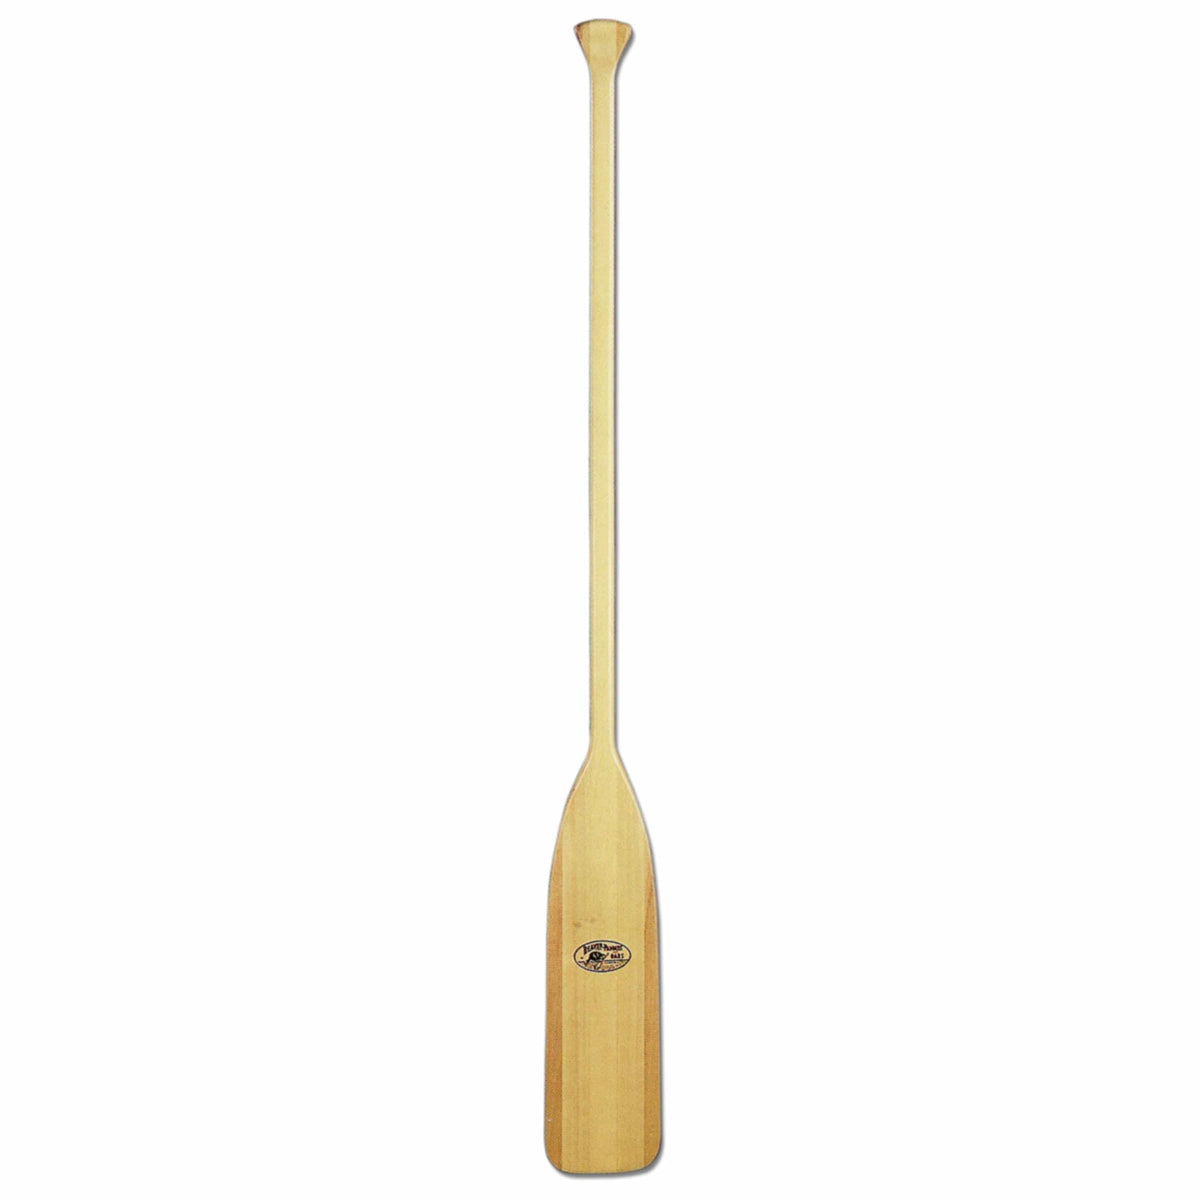 Caviness BP Varnished Wooden Paddle 4.5' #BP45